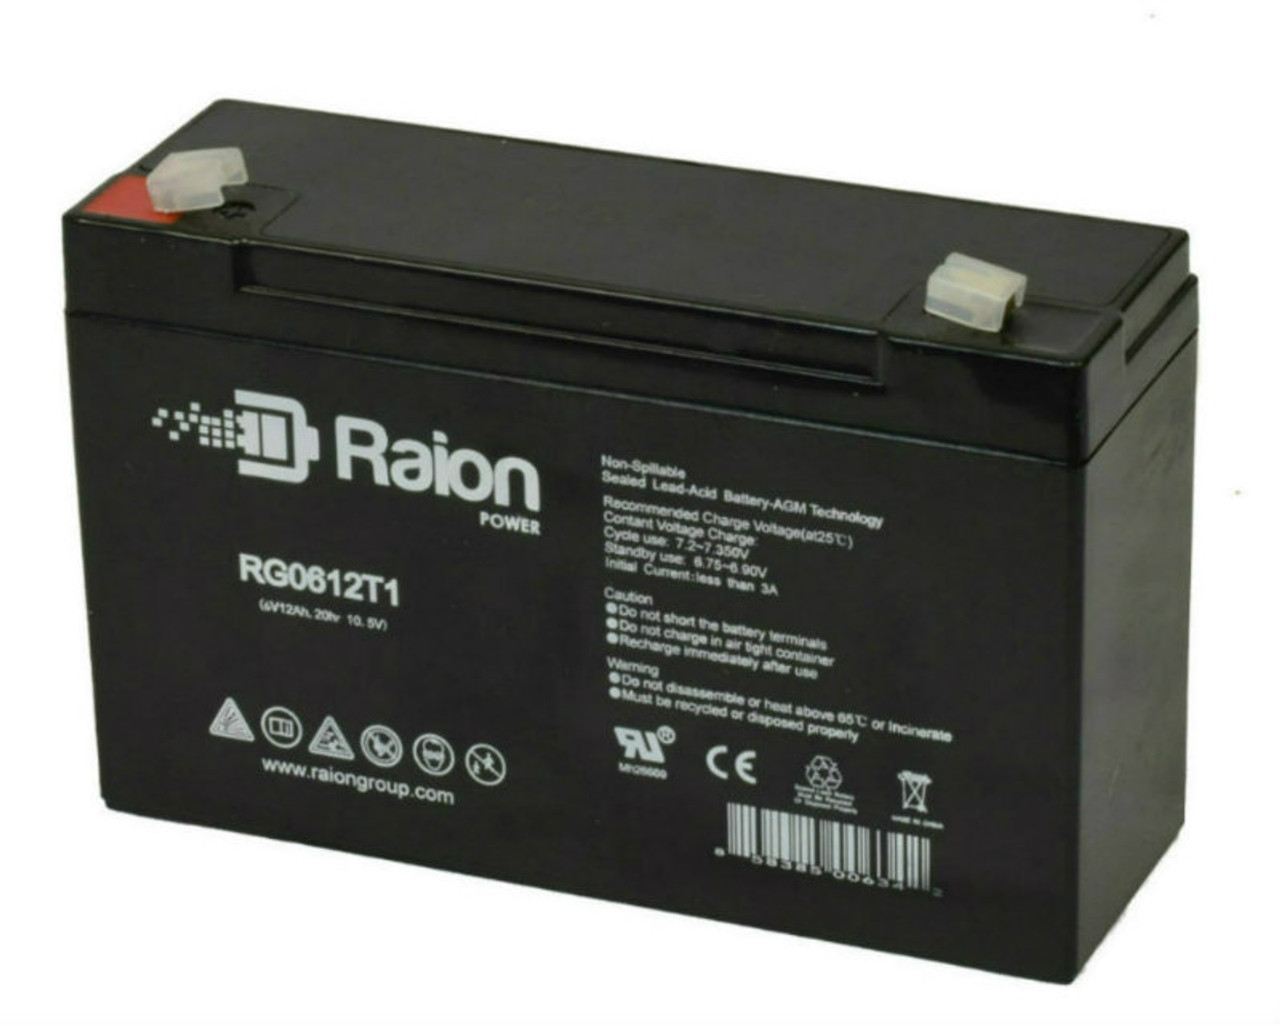 Raion Power RG06120T1 Replacement Battery for MK Battery ES12-6-F1